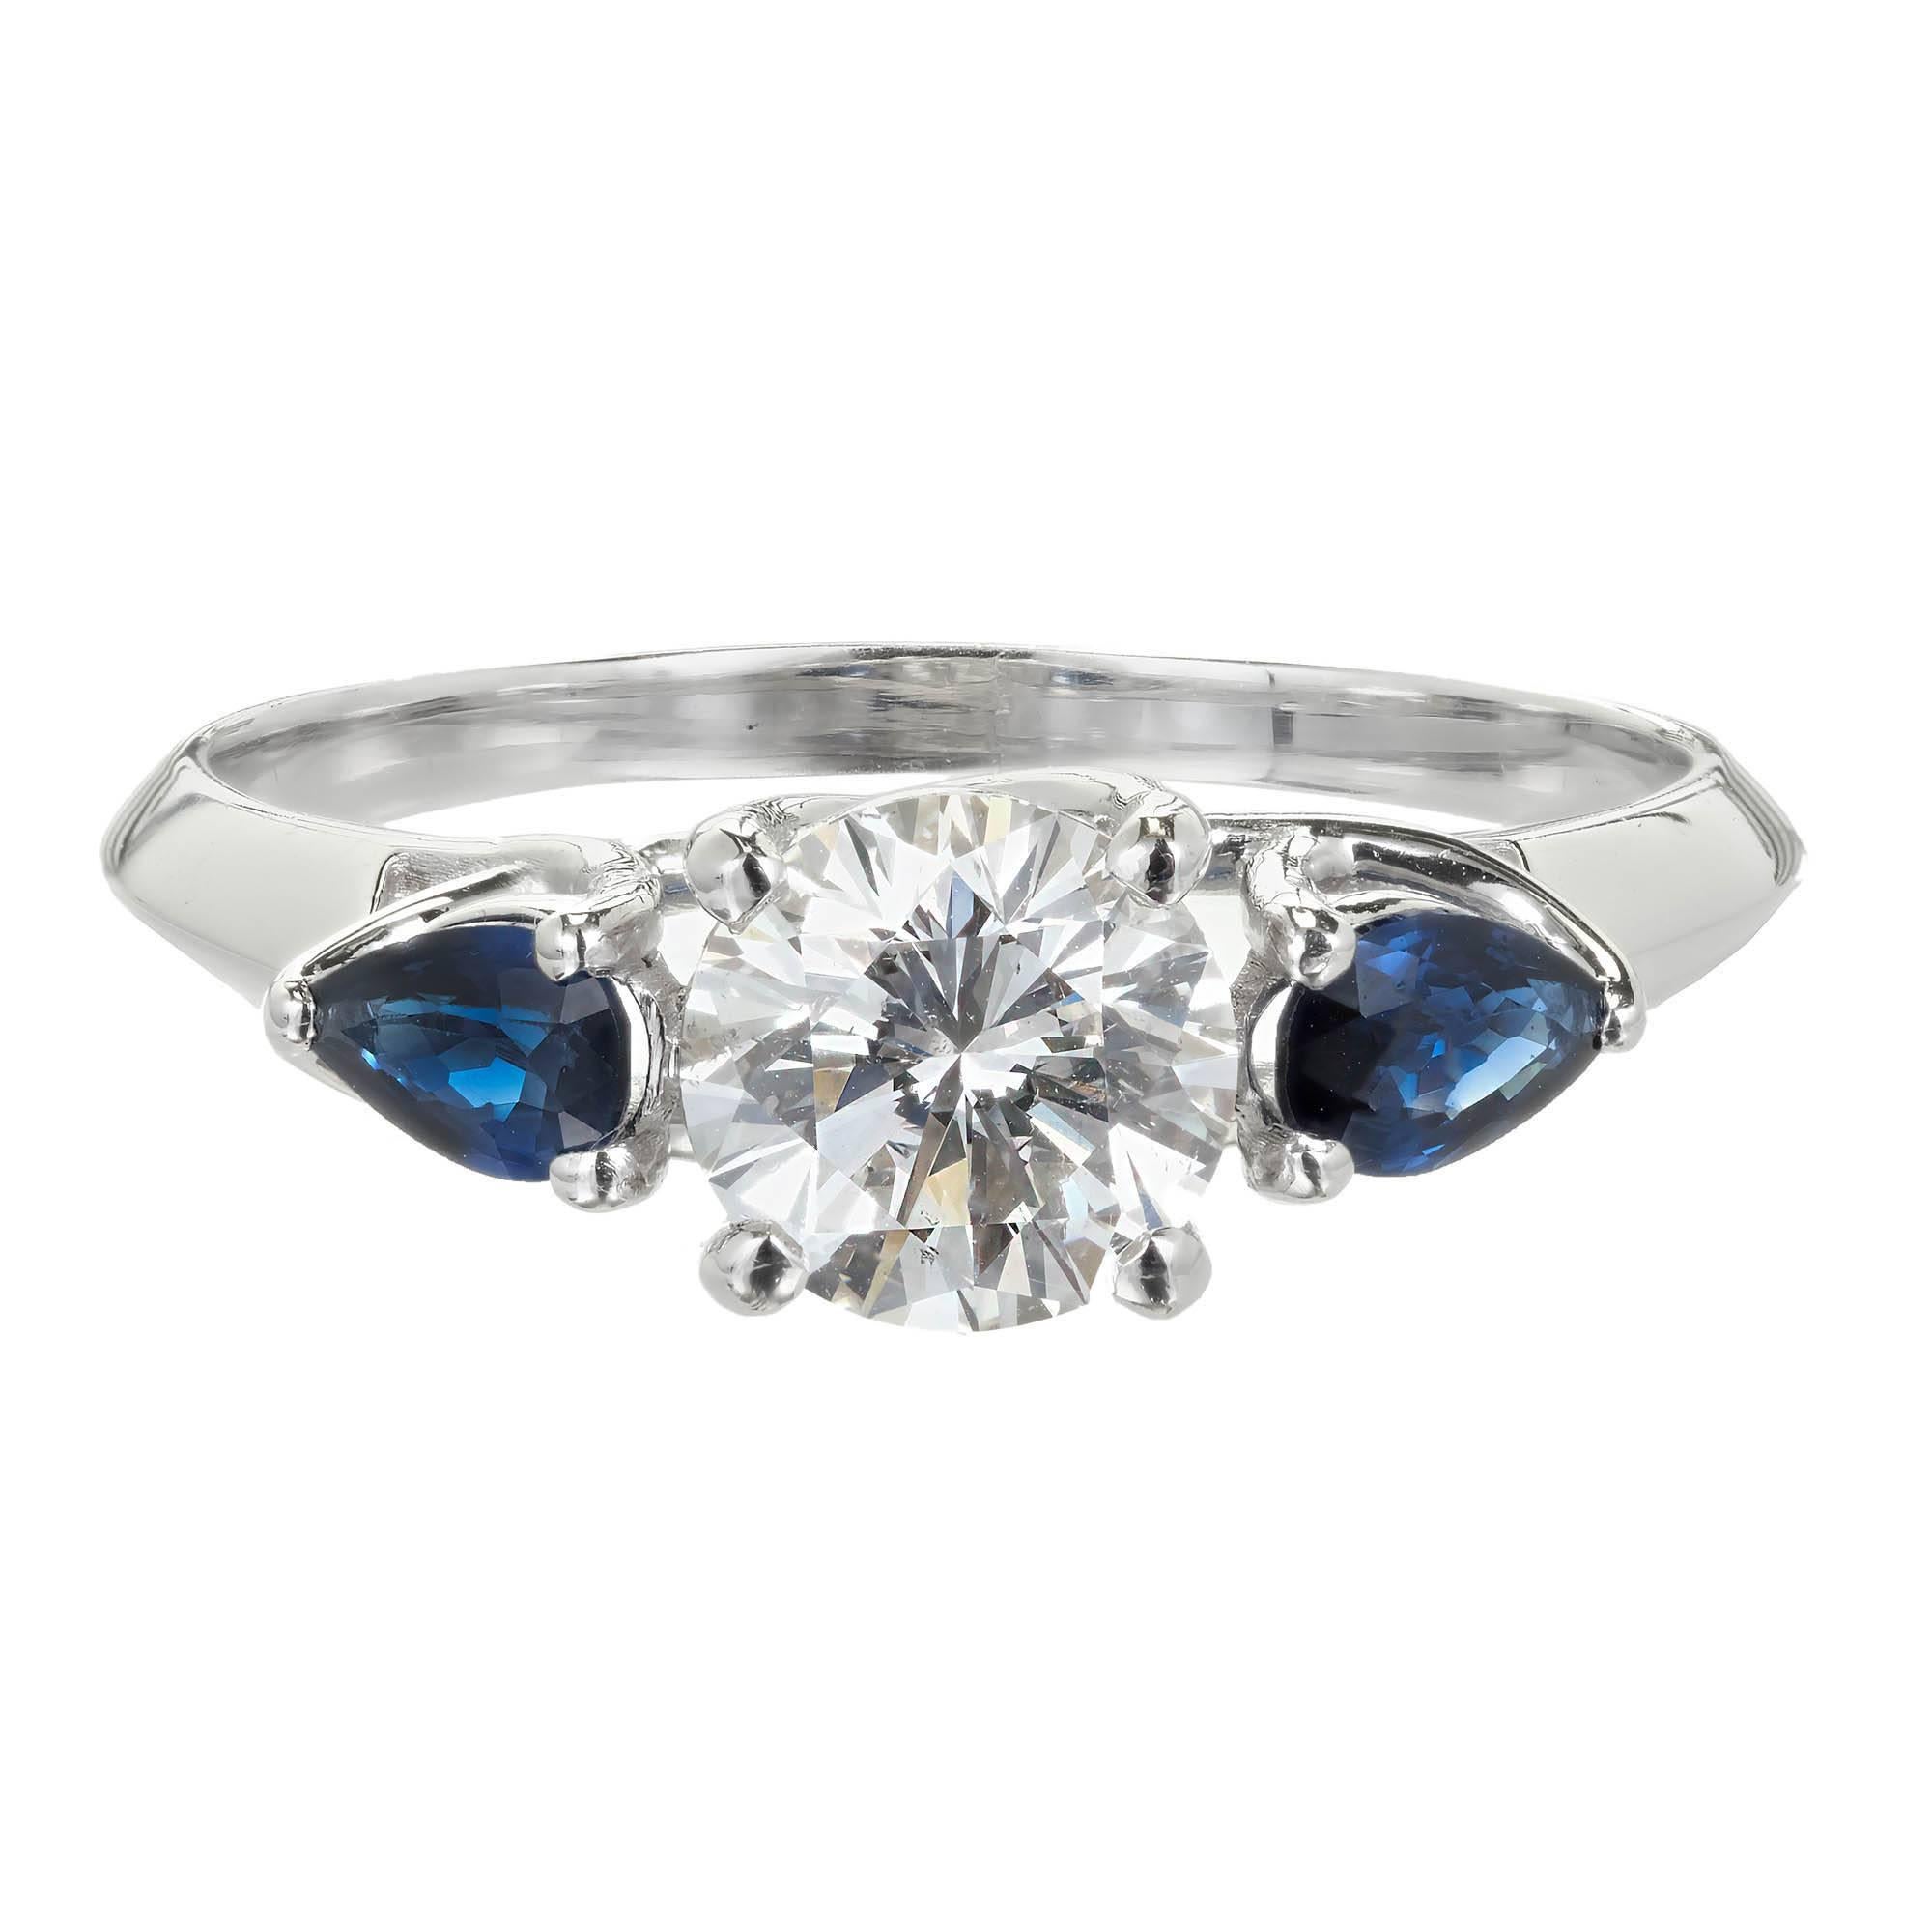 Peter Suchy custom made diamond and sapphire engagement ring with a bright white sparkly center Diamond and 2 pear shaped bright blue Sapphires side diamonds in a simple but very different crossed prong three-stone platinum engagement ring. 

1